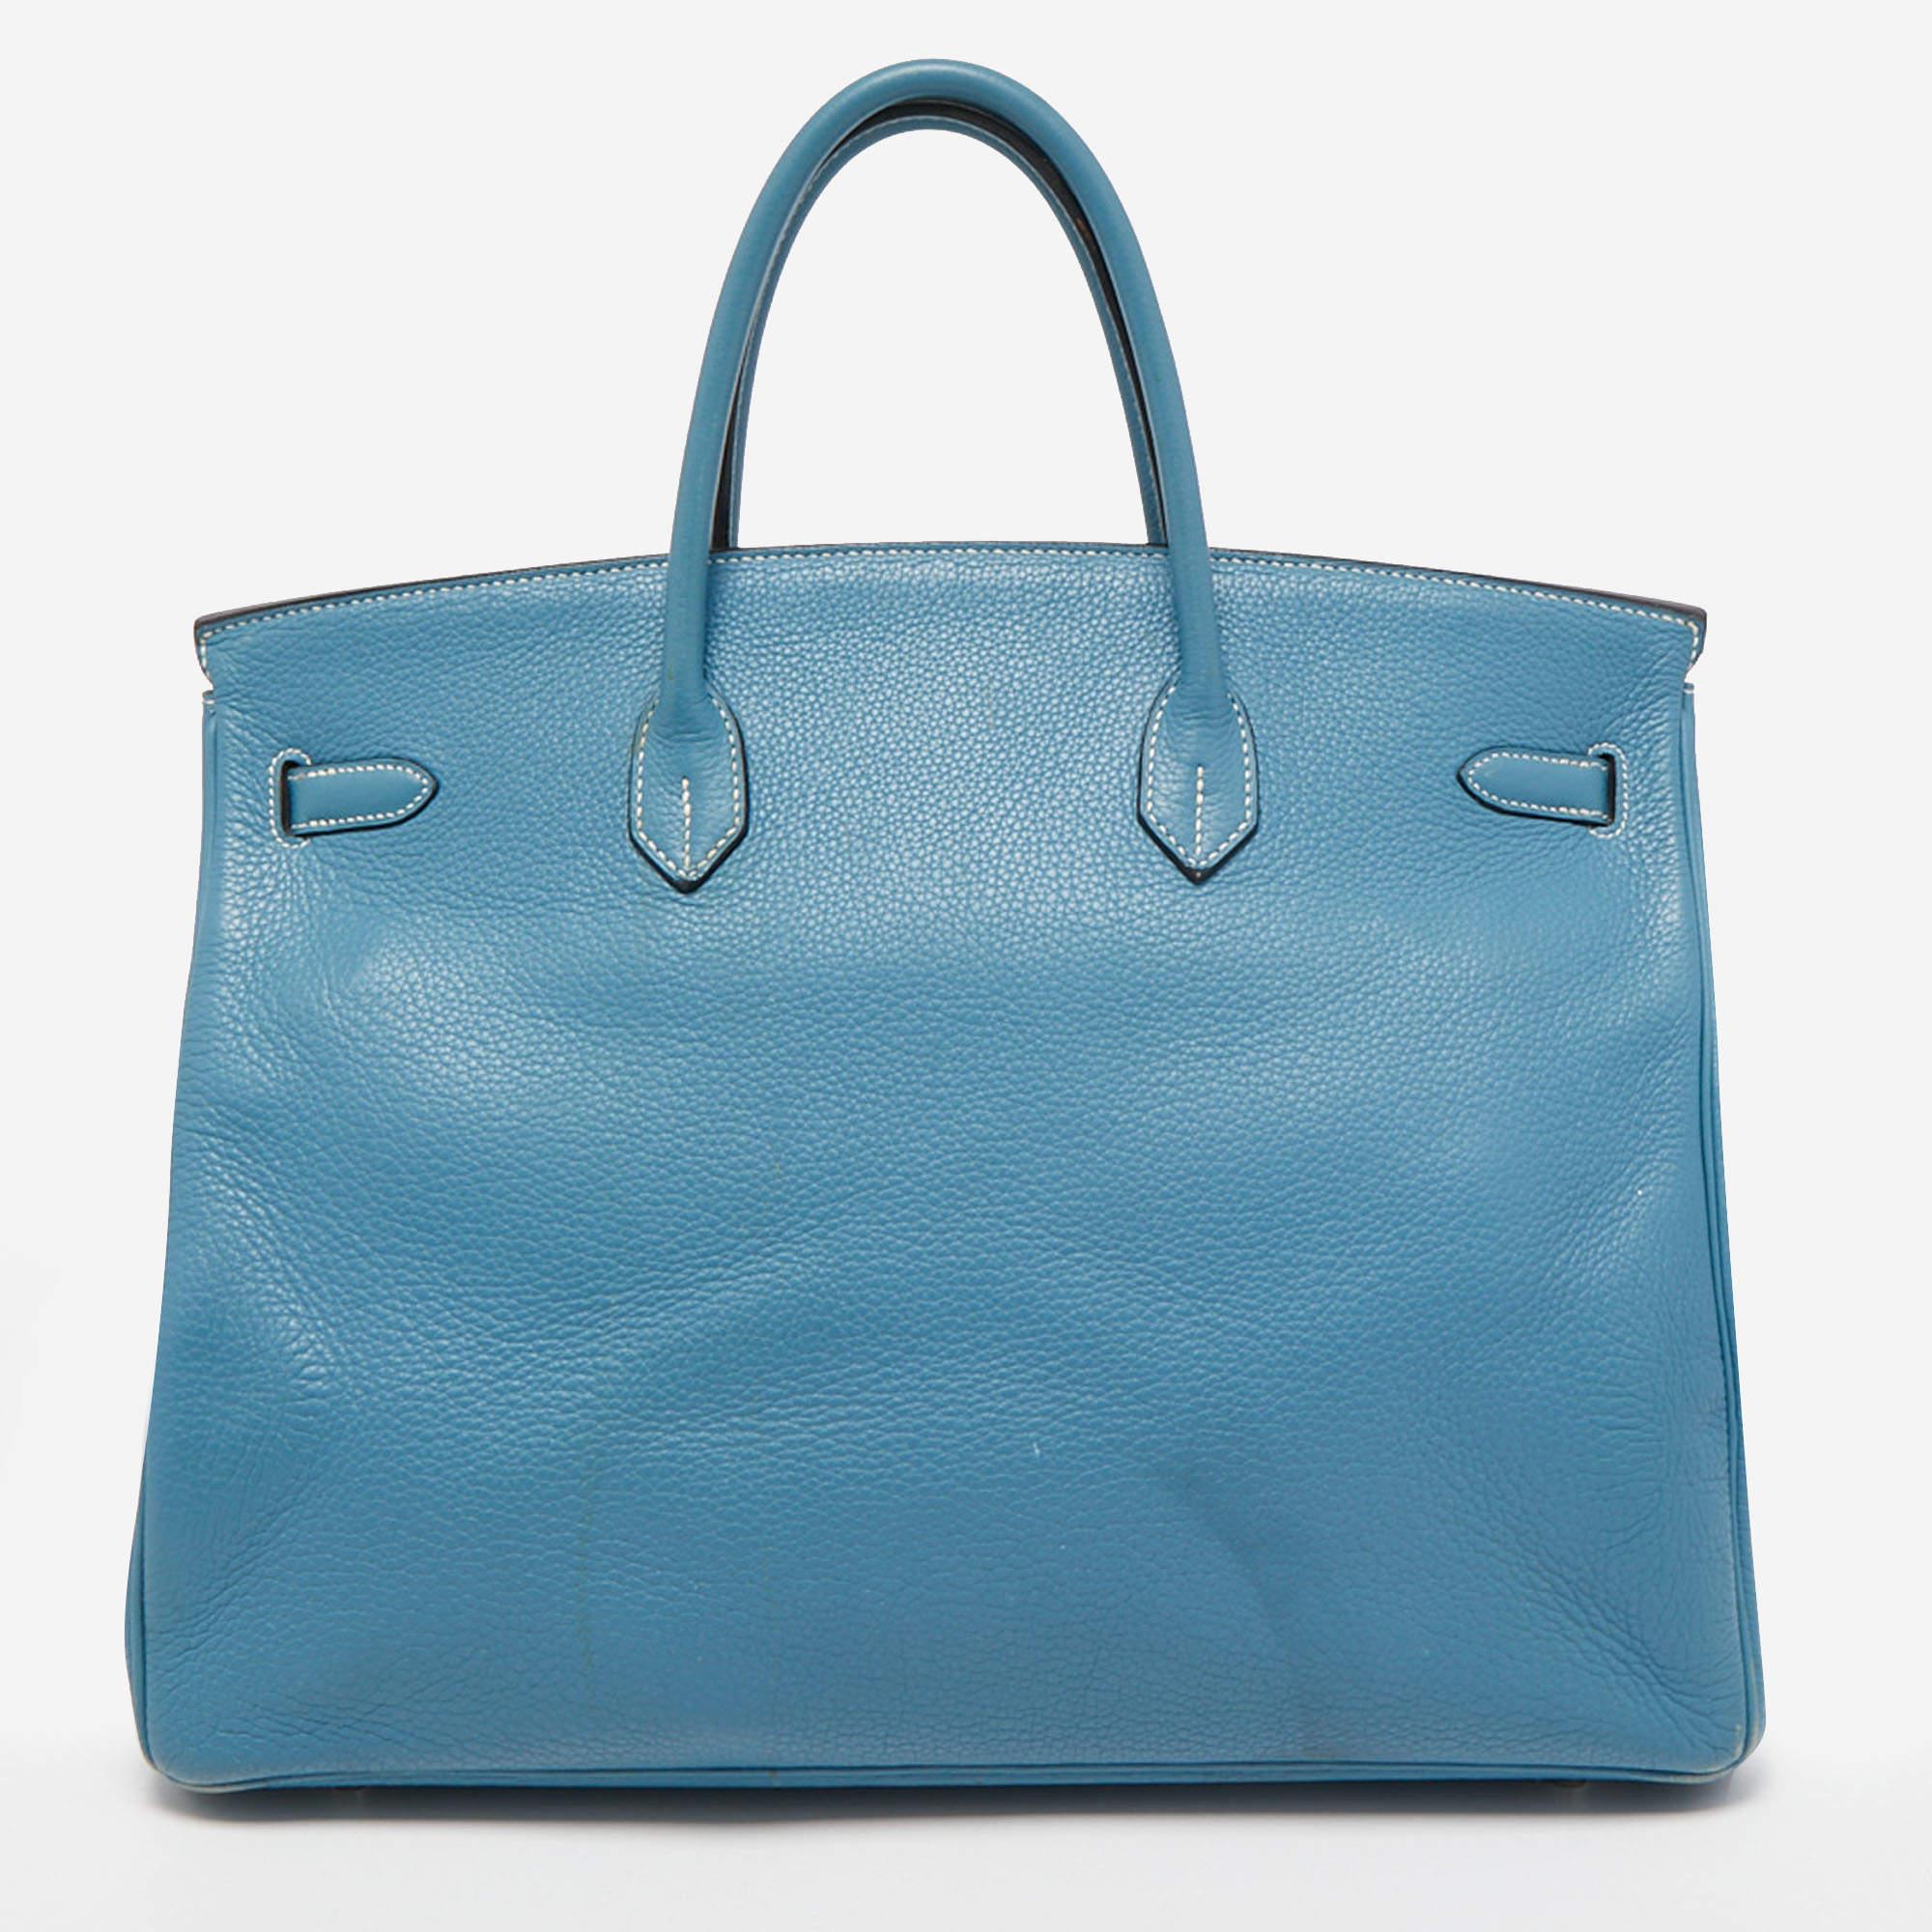 The Hermès Birkin is rightly one of the most desired handbags in the world. Handcrafted from the highest quality of leather by skilled artisans, it takes long hours of rigorous effort to stitch a Birkin together. Crafted with expertise, the bag